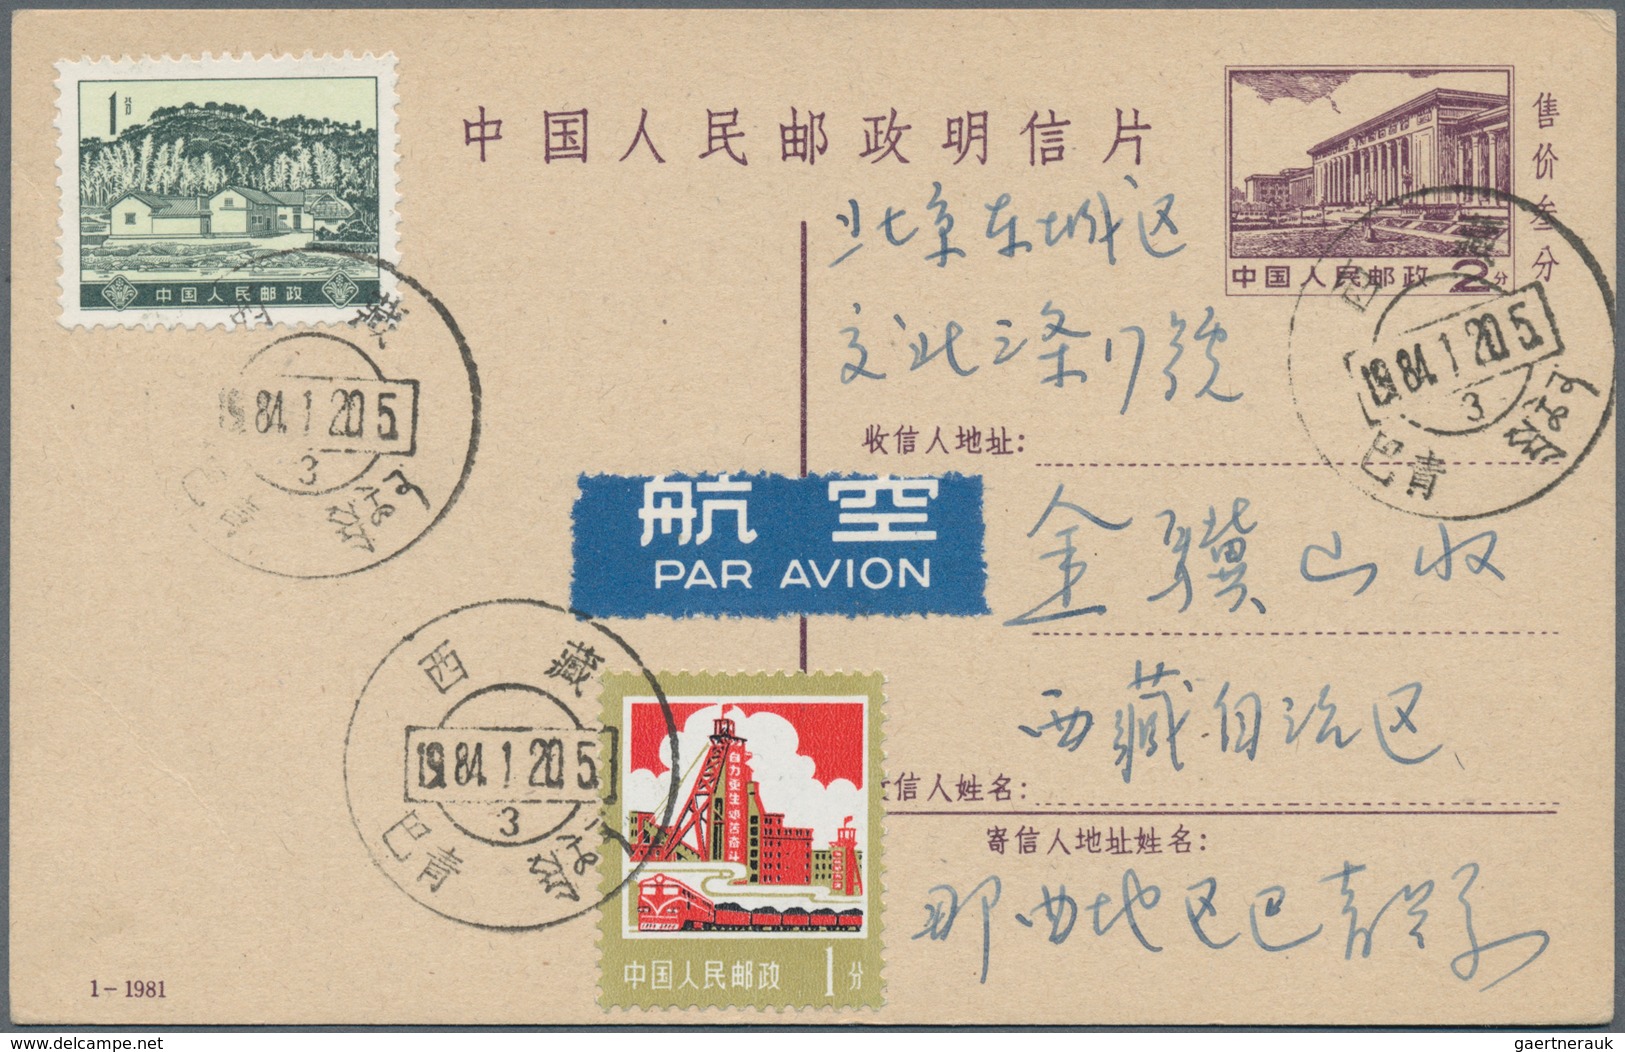 China - Volksrepublik - Ganzsachen: 1981, Used In Tibet, Cards 2 F. Brown (1-1981) Uprated By Air Ma - Cartes Postales